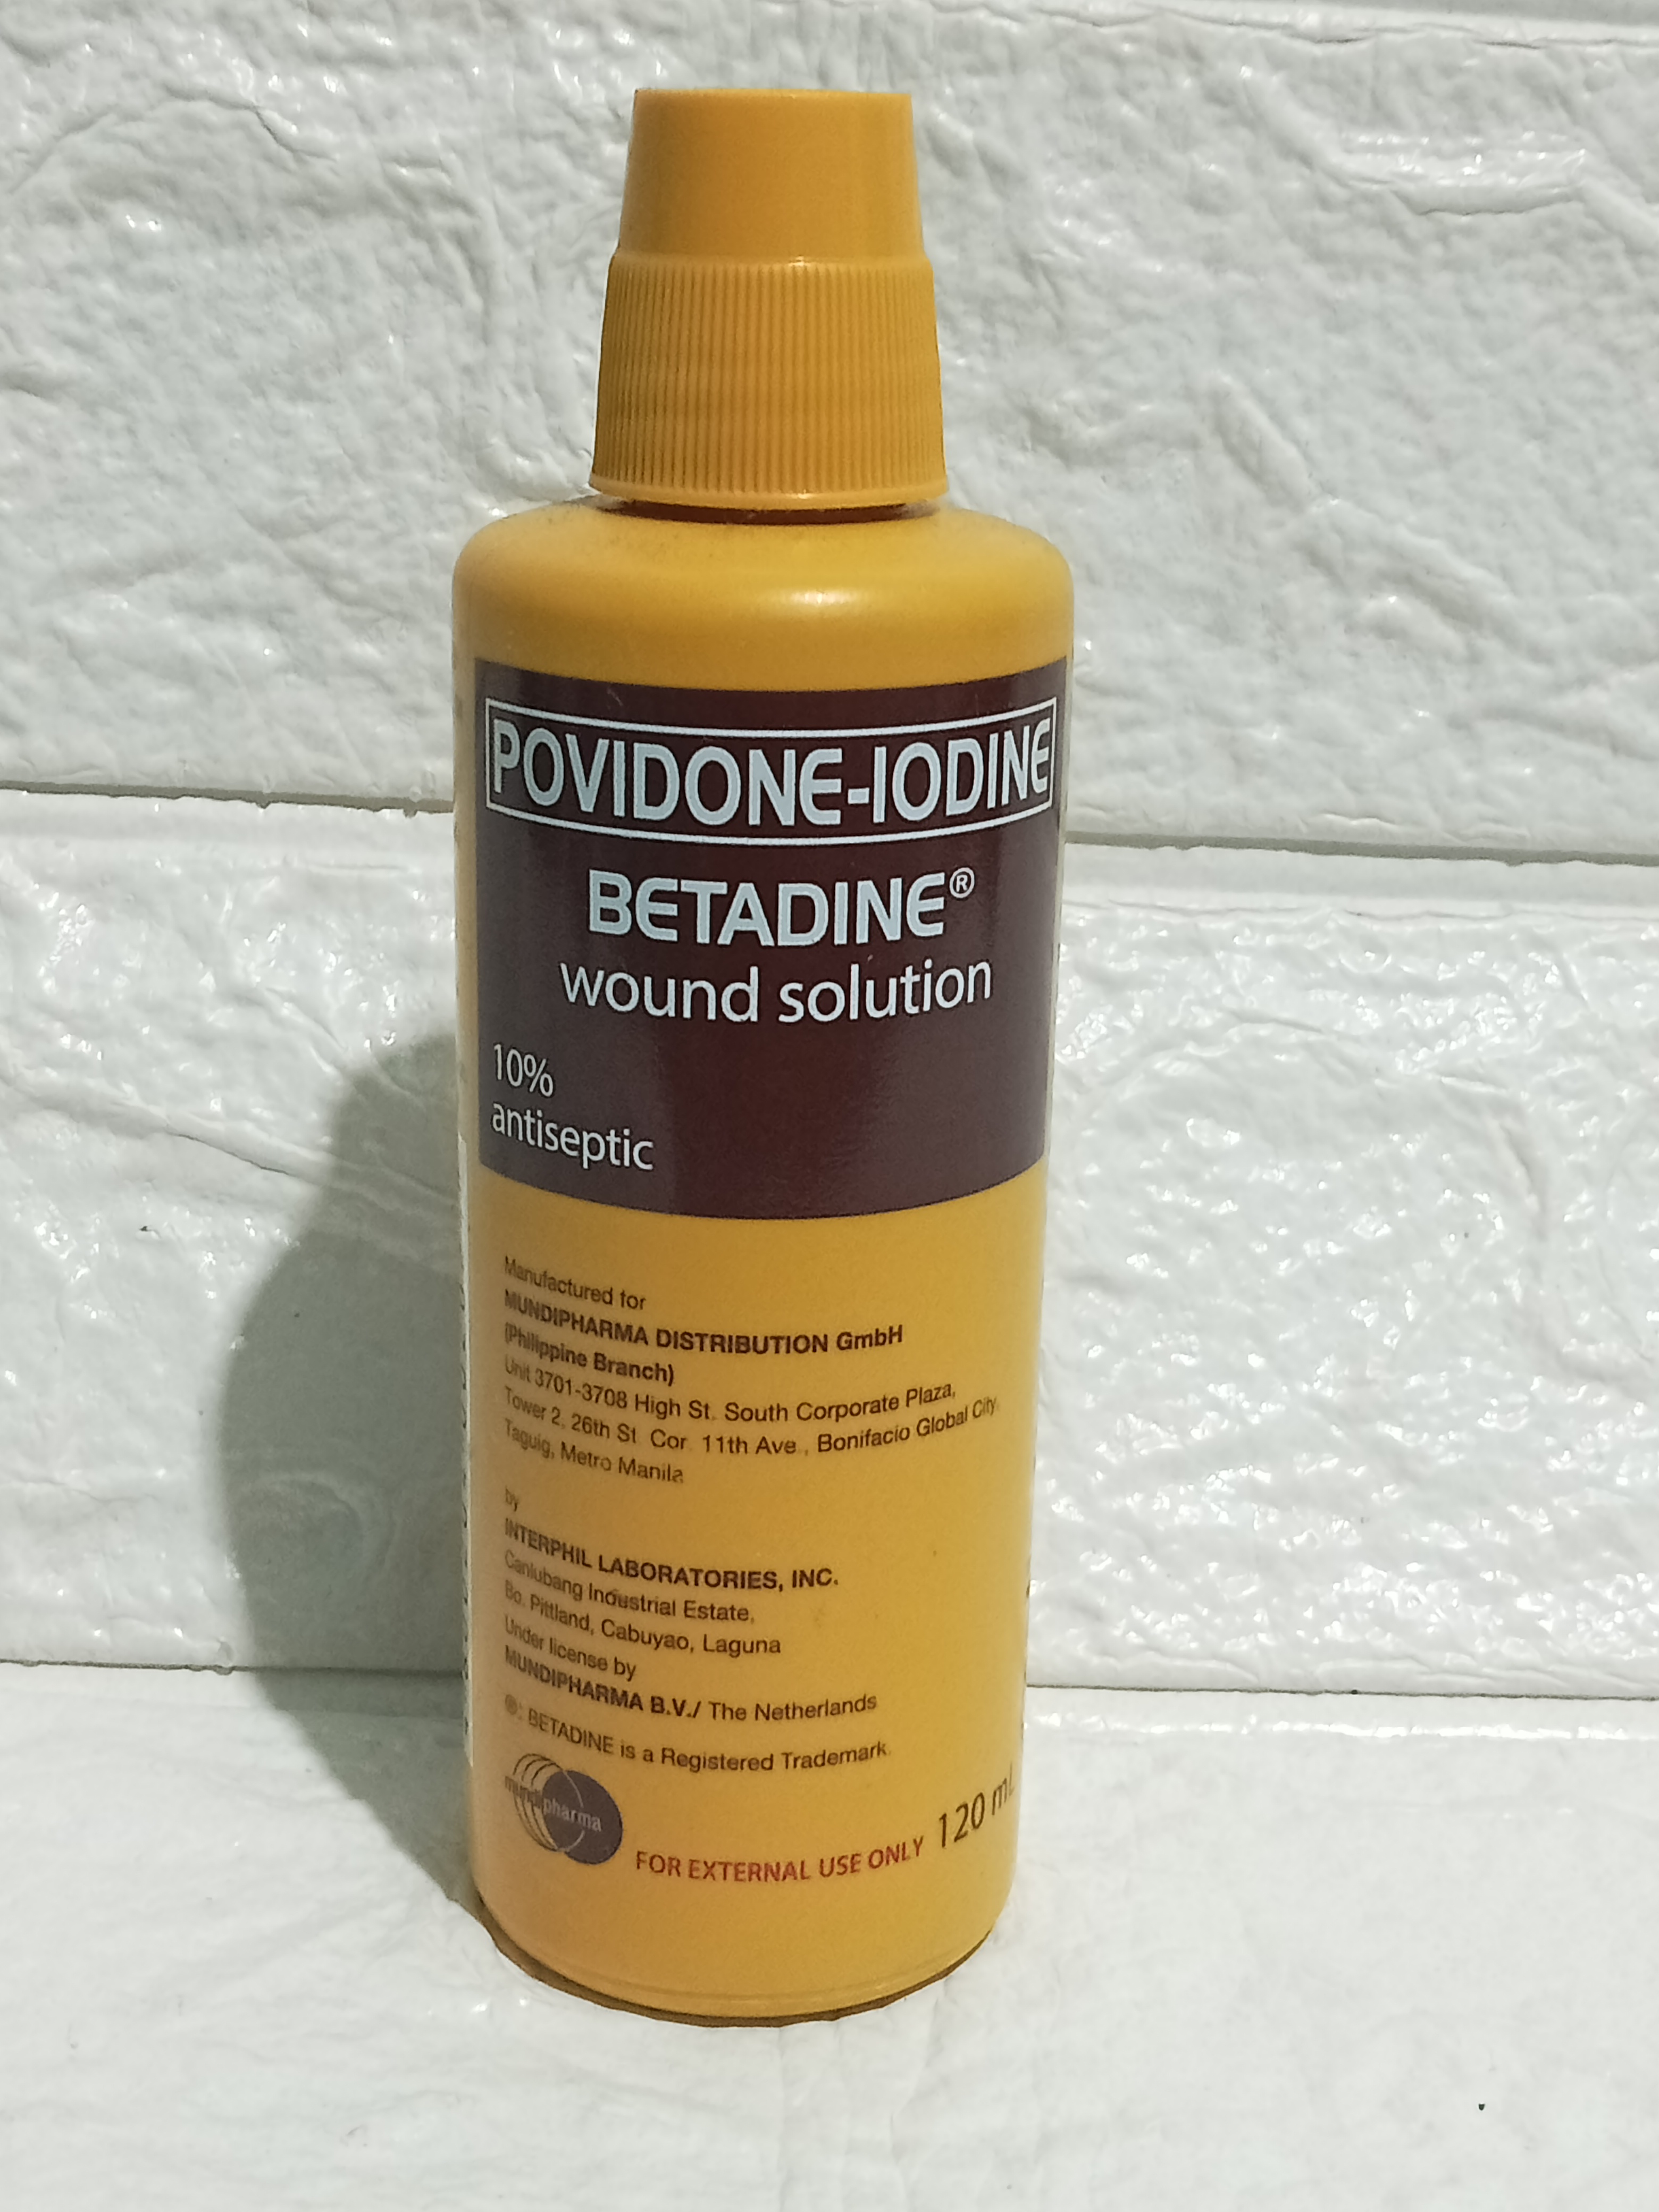 Betadine POVIDONE-IODINE WOUND SOLUTION 10% antiseptic (120ml) Kills germs  and stops infection non-sting, painless and gentle on kids.